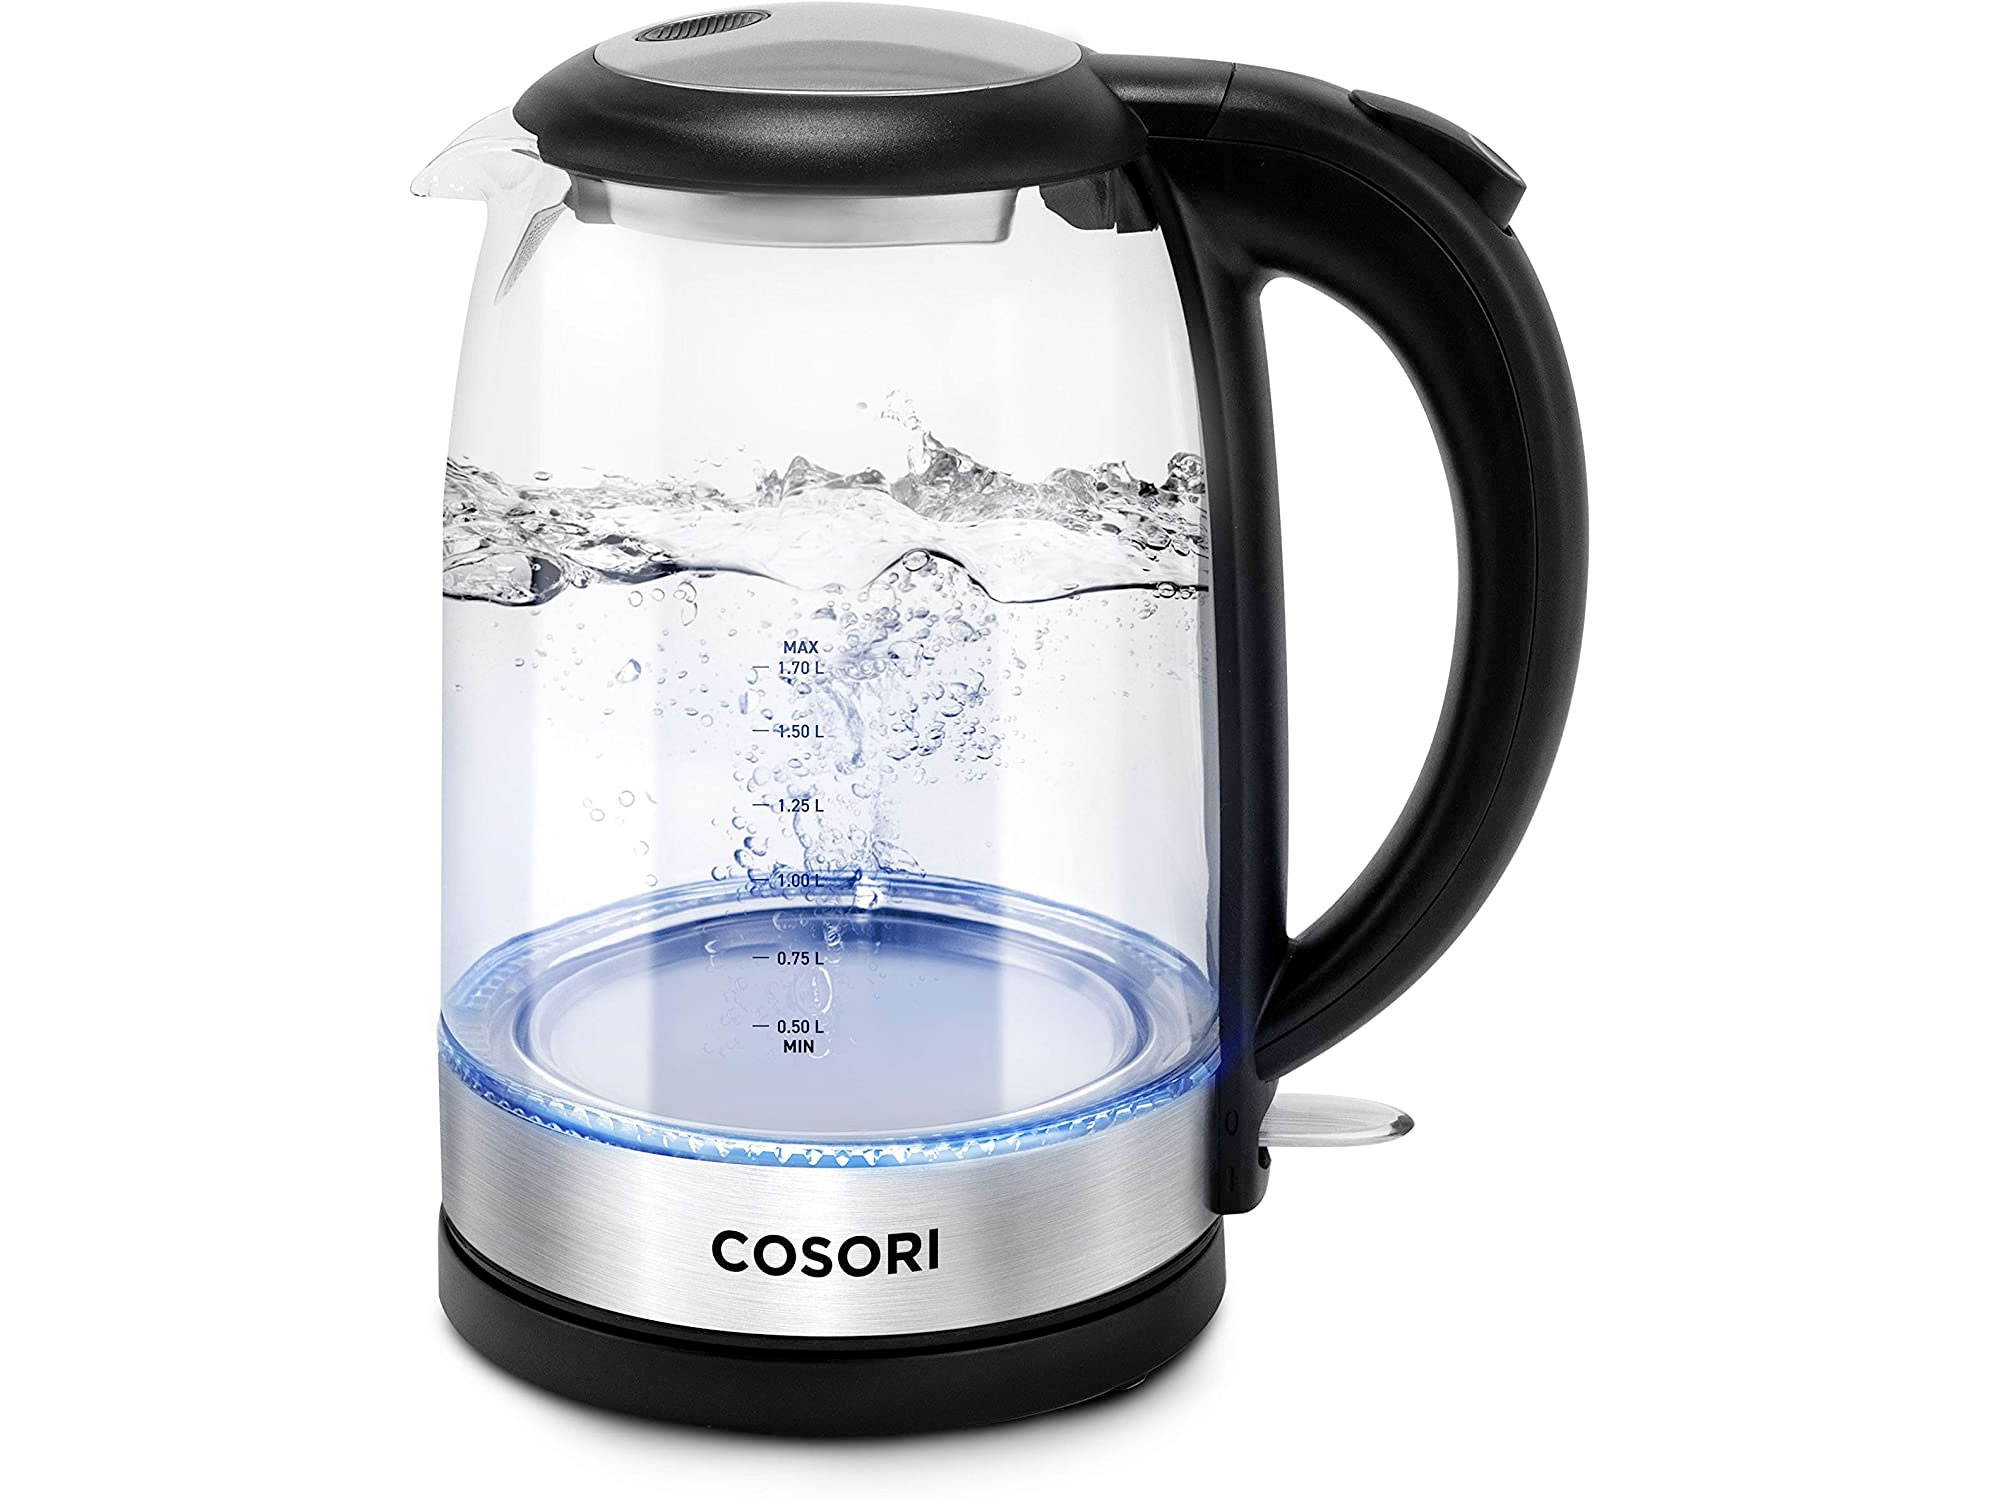 Amazon：COSORI Electric Kettle with Upgraded Stainless Steel Filter只卖$33.75